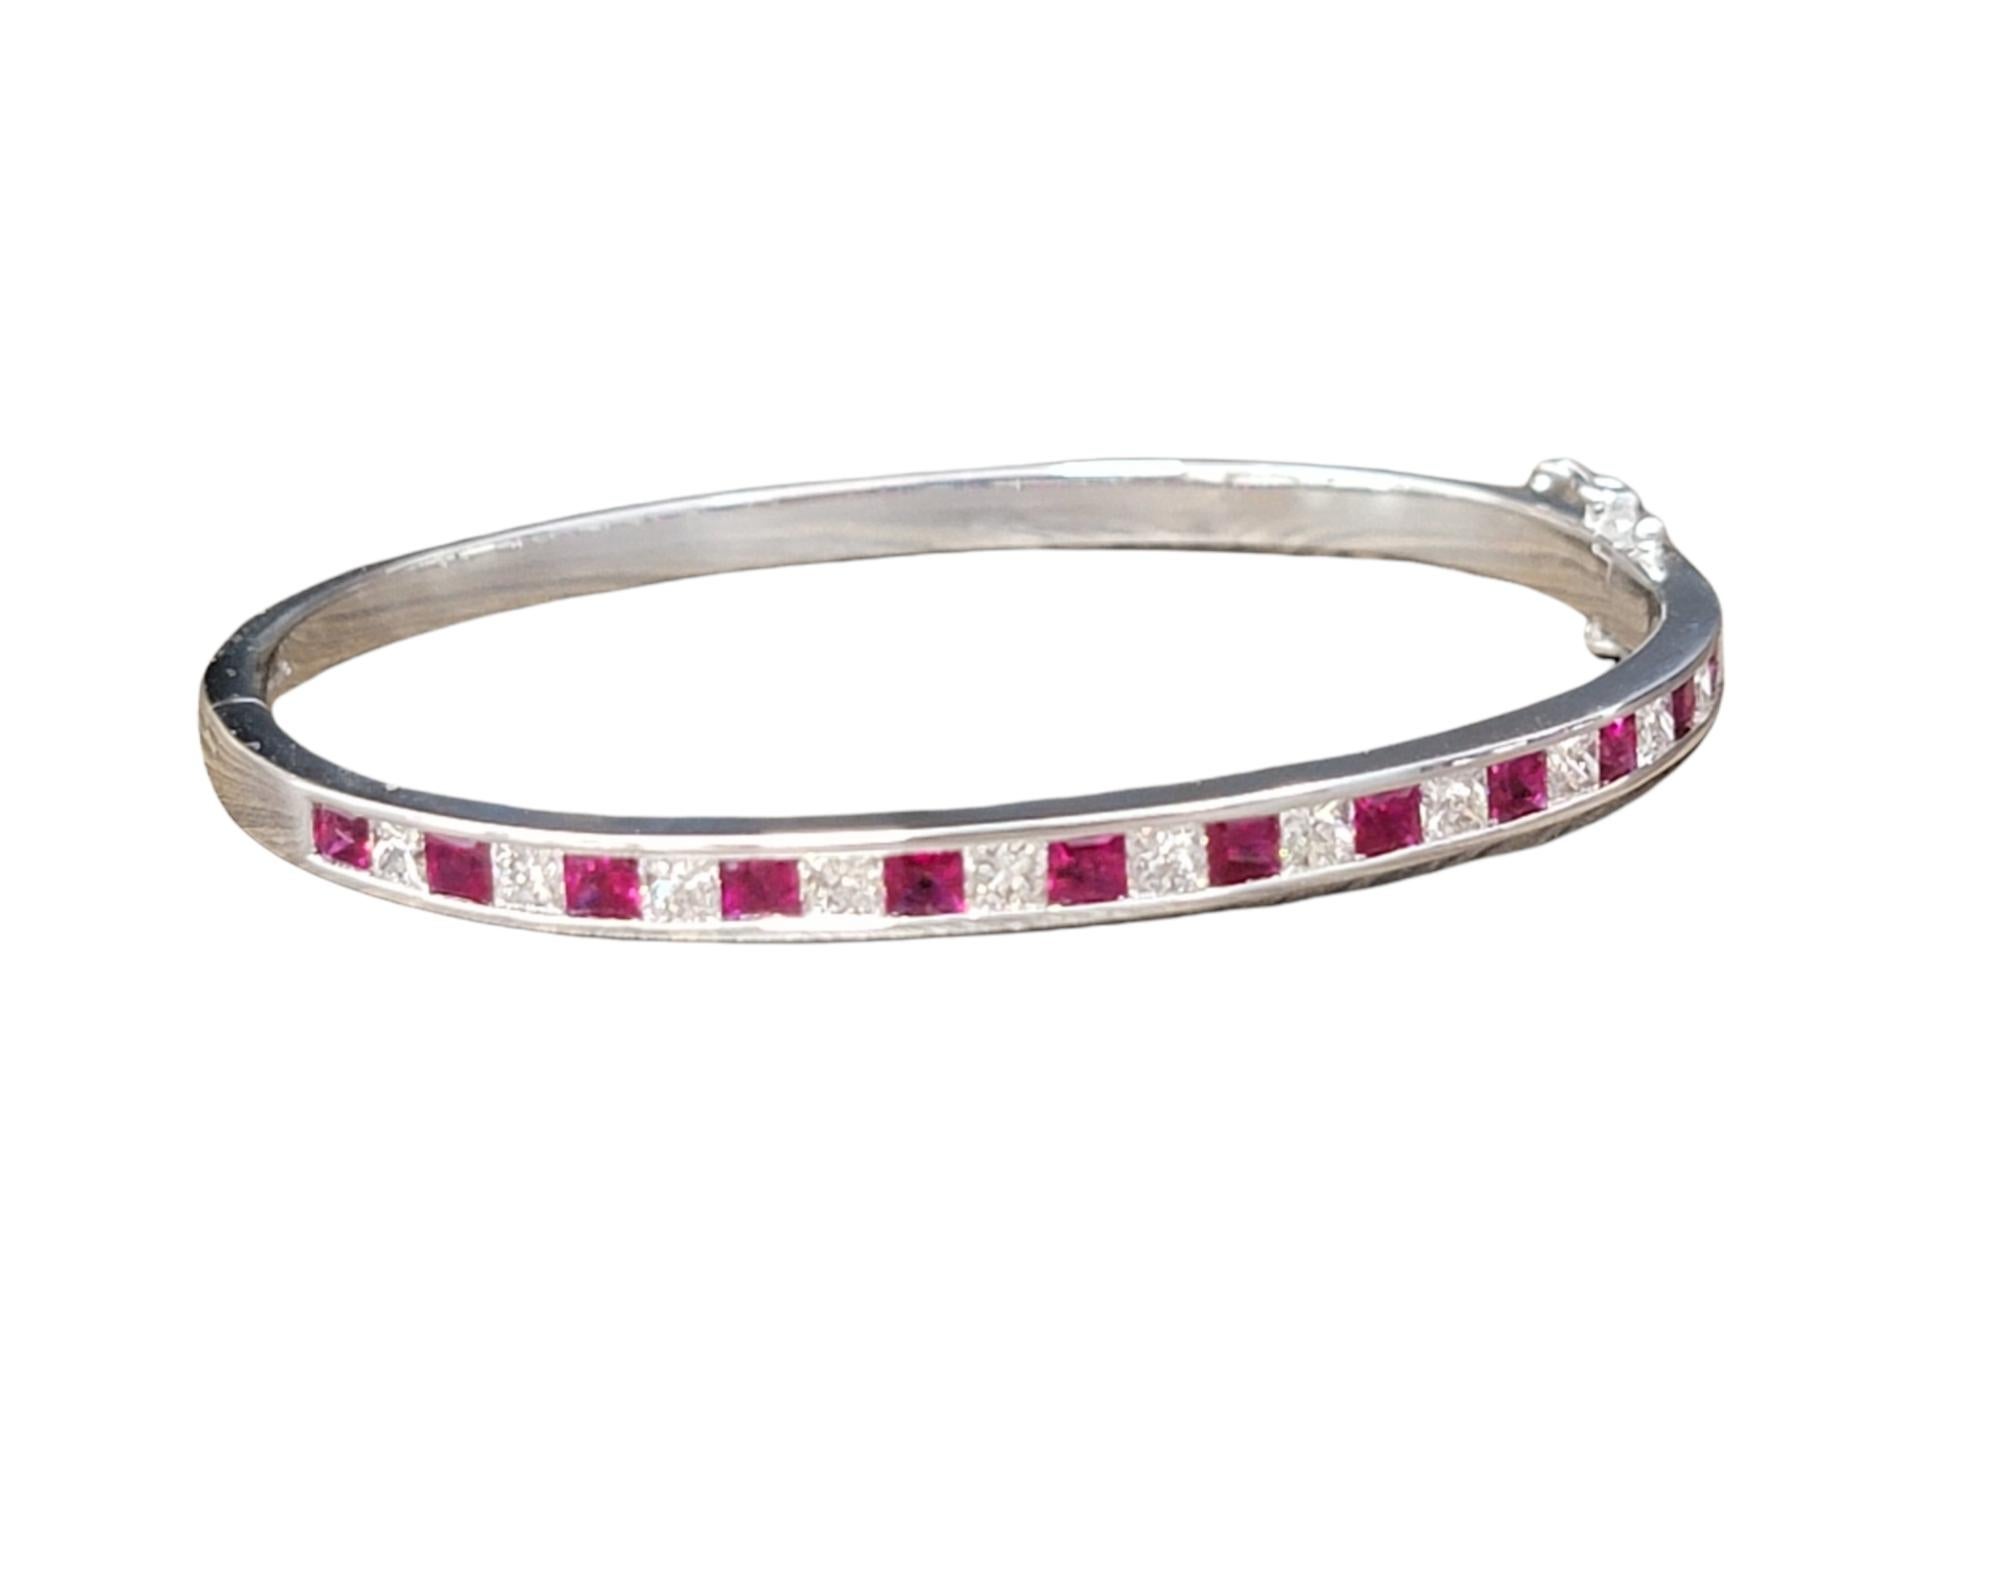 Beautiful bangle bracelet with a bright pop of color! This gorgeous piece absolutely dazzles with its rich red rubies and bright white diamonds. The sleek, linear design paired with the contemporary squared shape of the gemstones, takes this classic